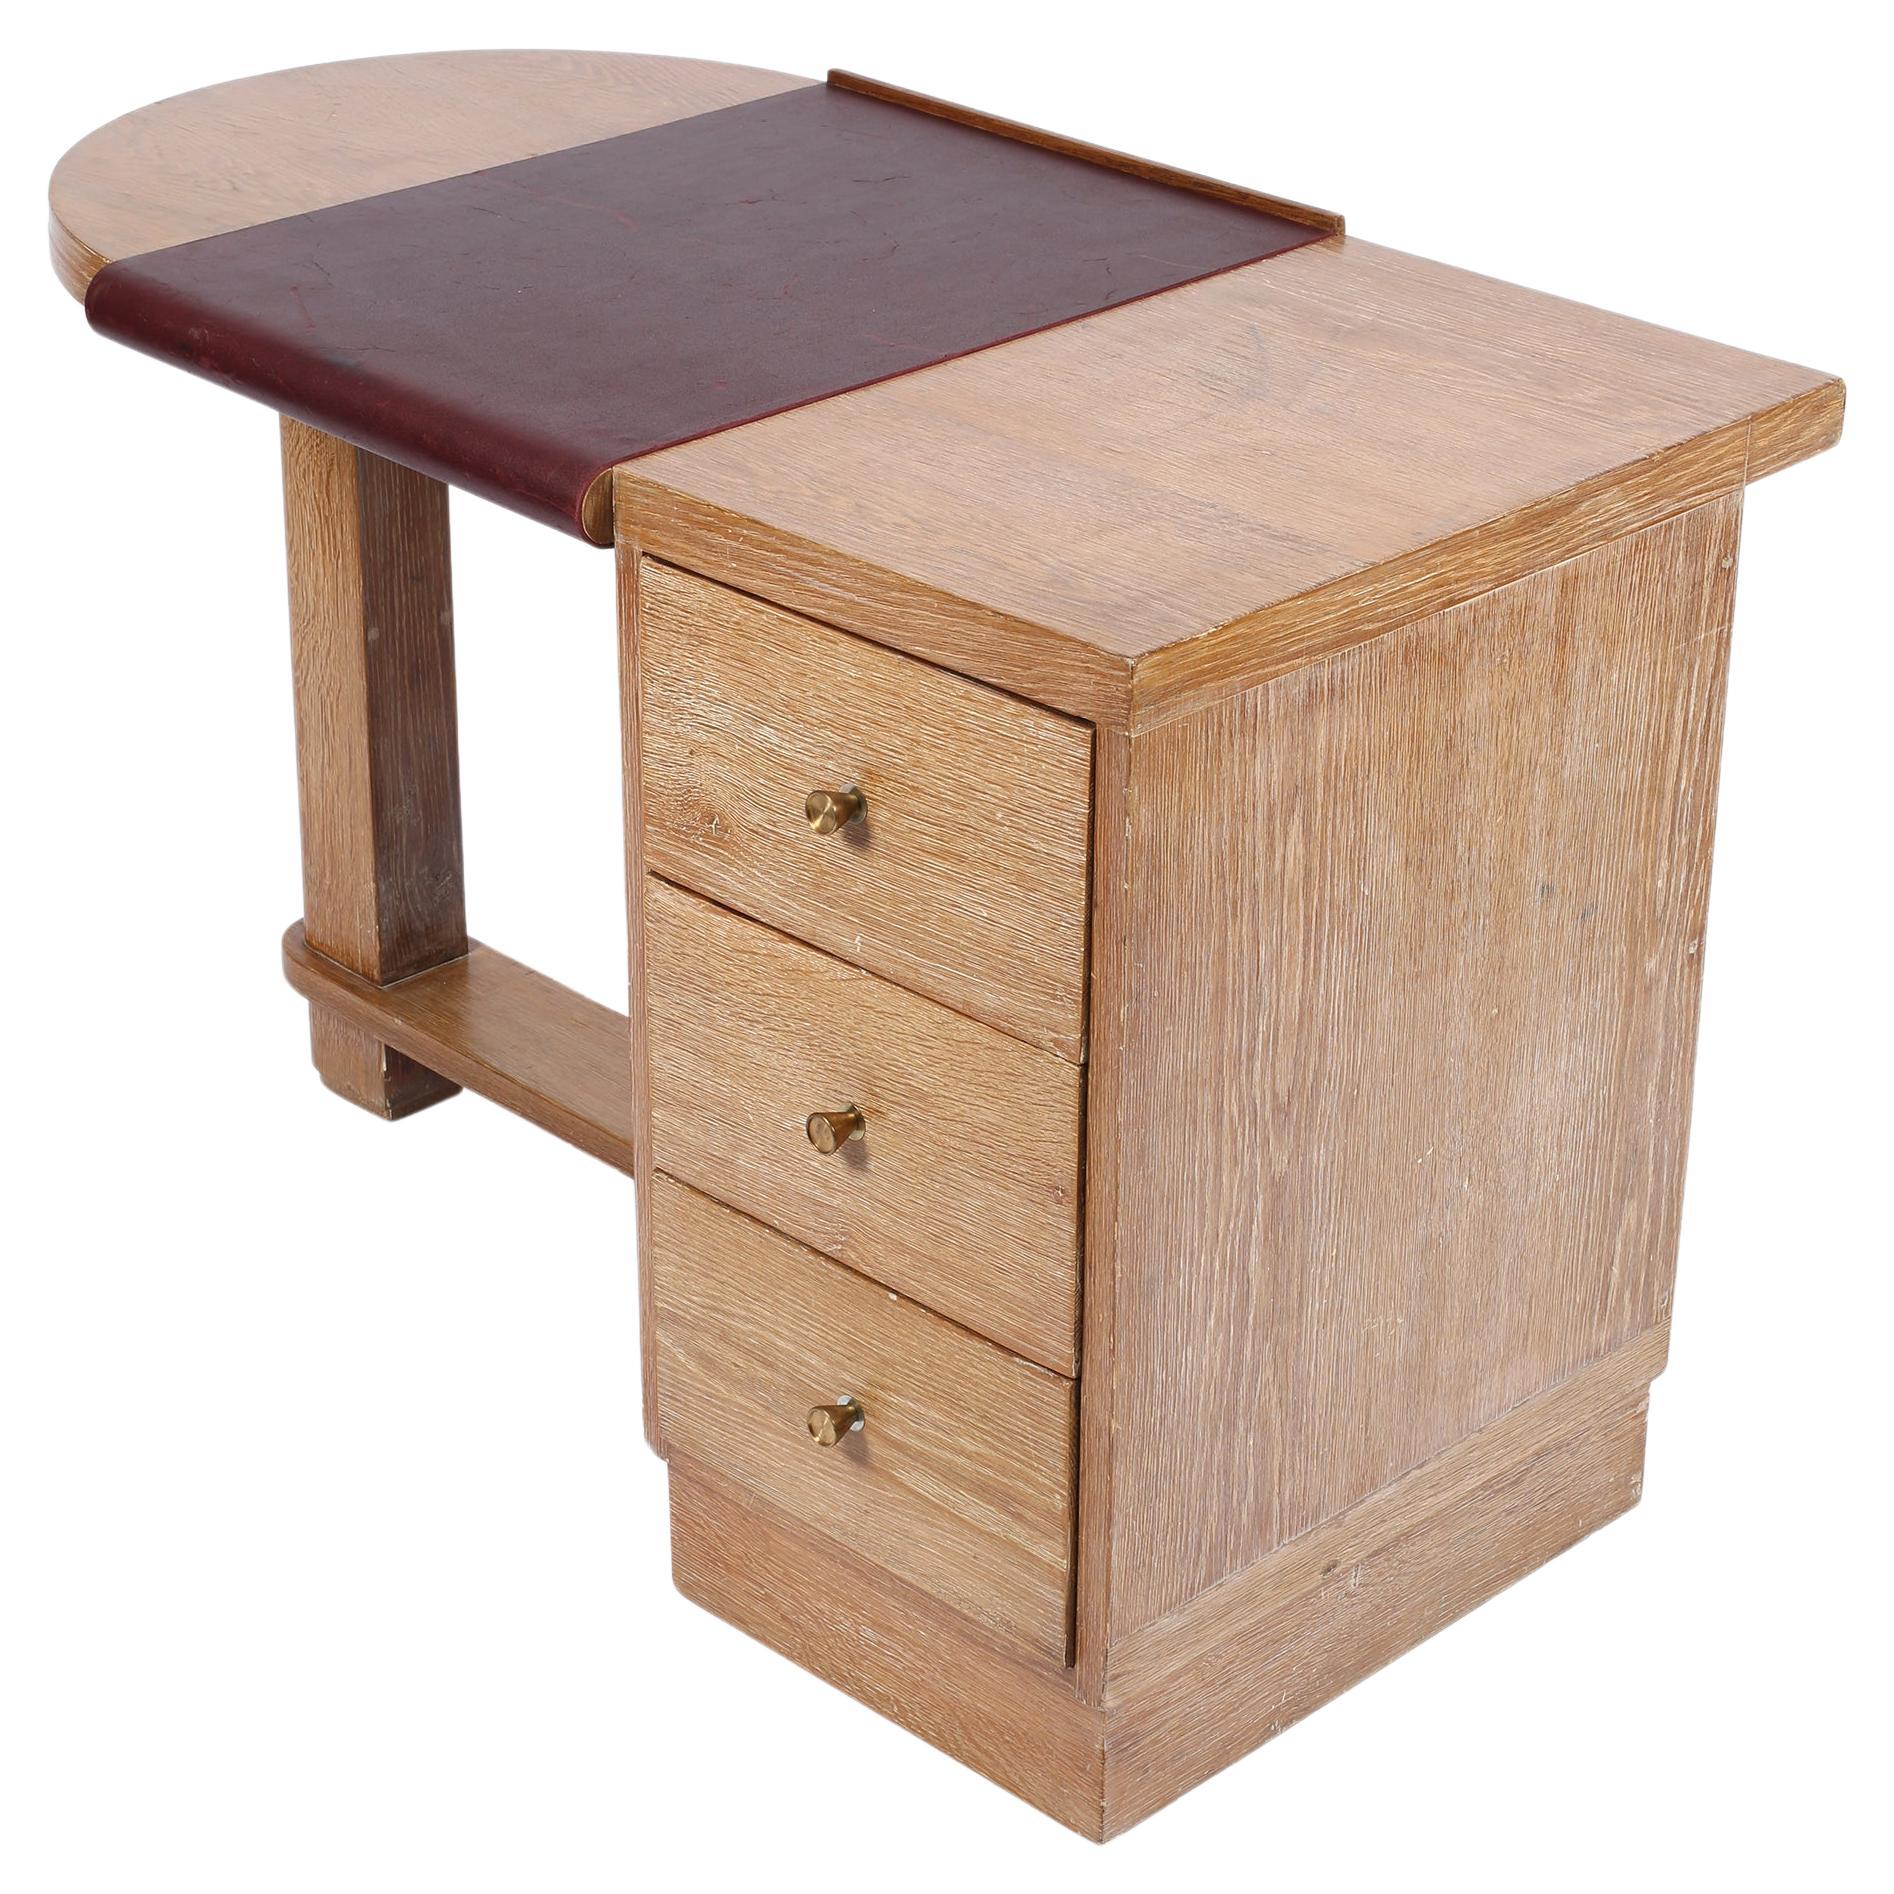 1930s French Art Deco Limed Oak and Leather Desk in the manner of Jacques Adnet For Sale